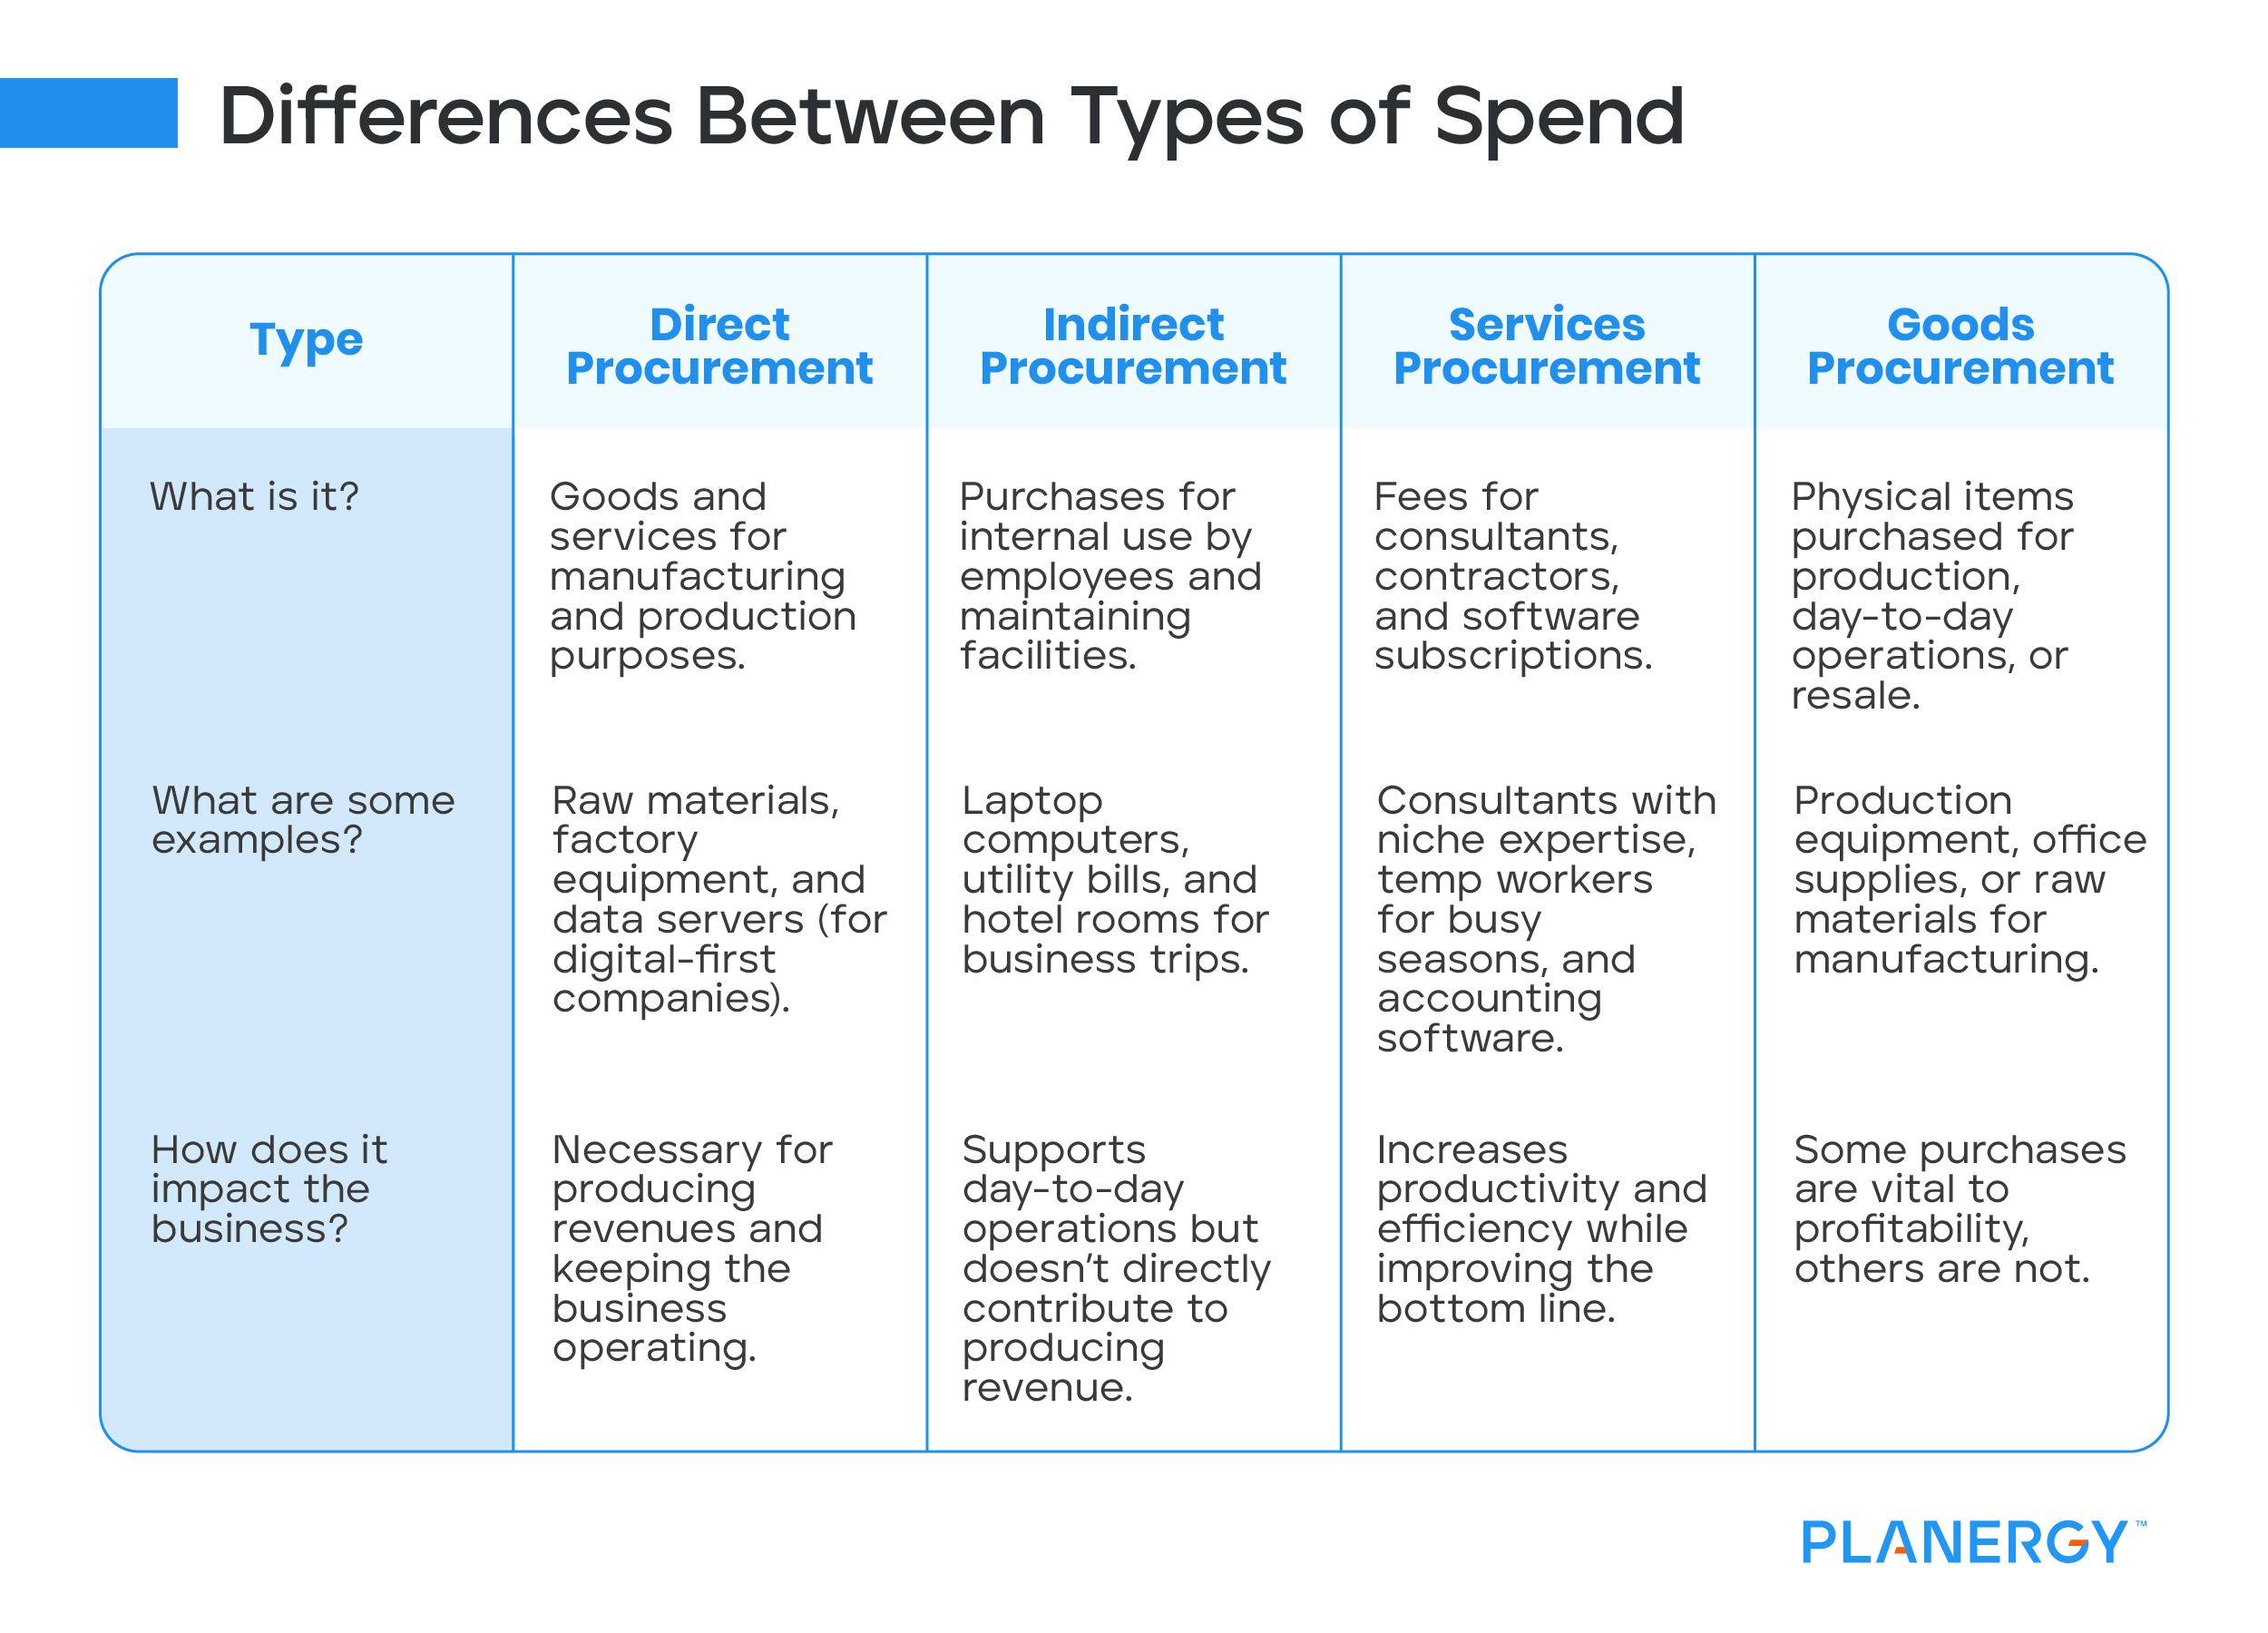 Differences Between Types of Spend